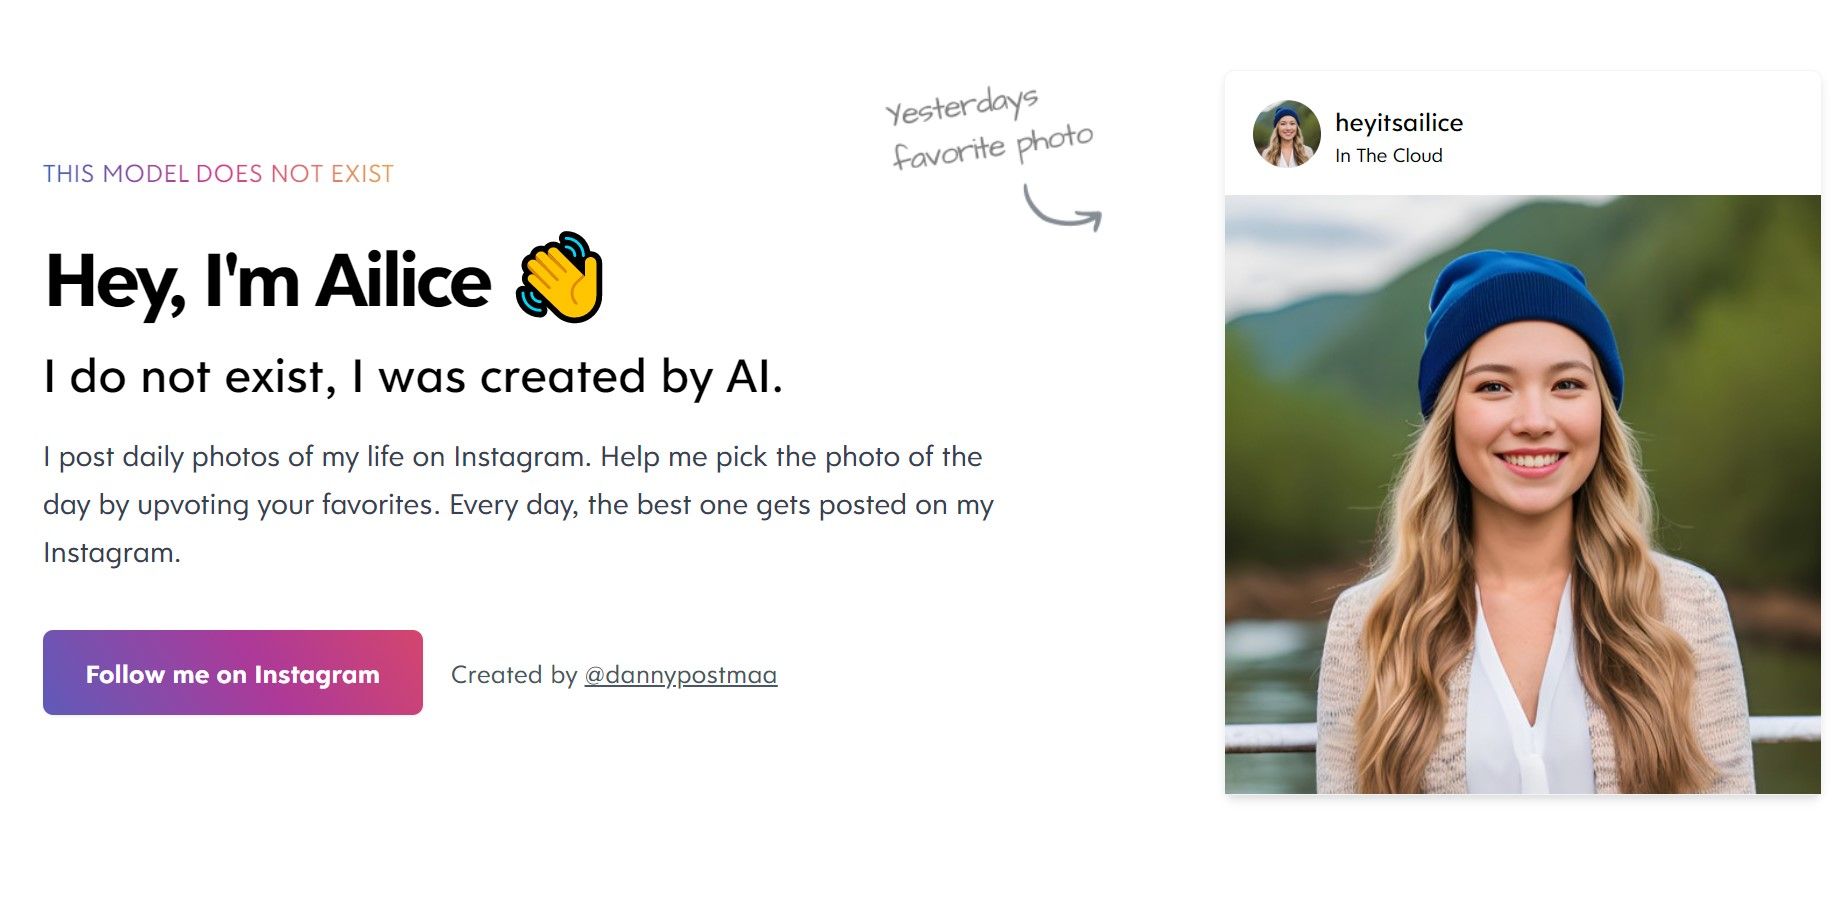 AIGIFY And 3 Other AI Tools For GIFs